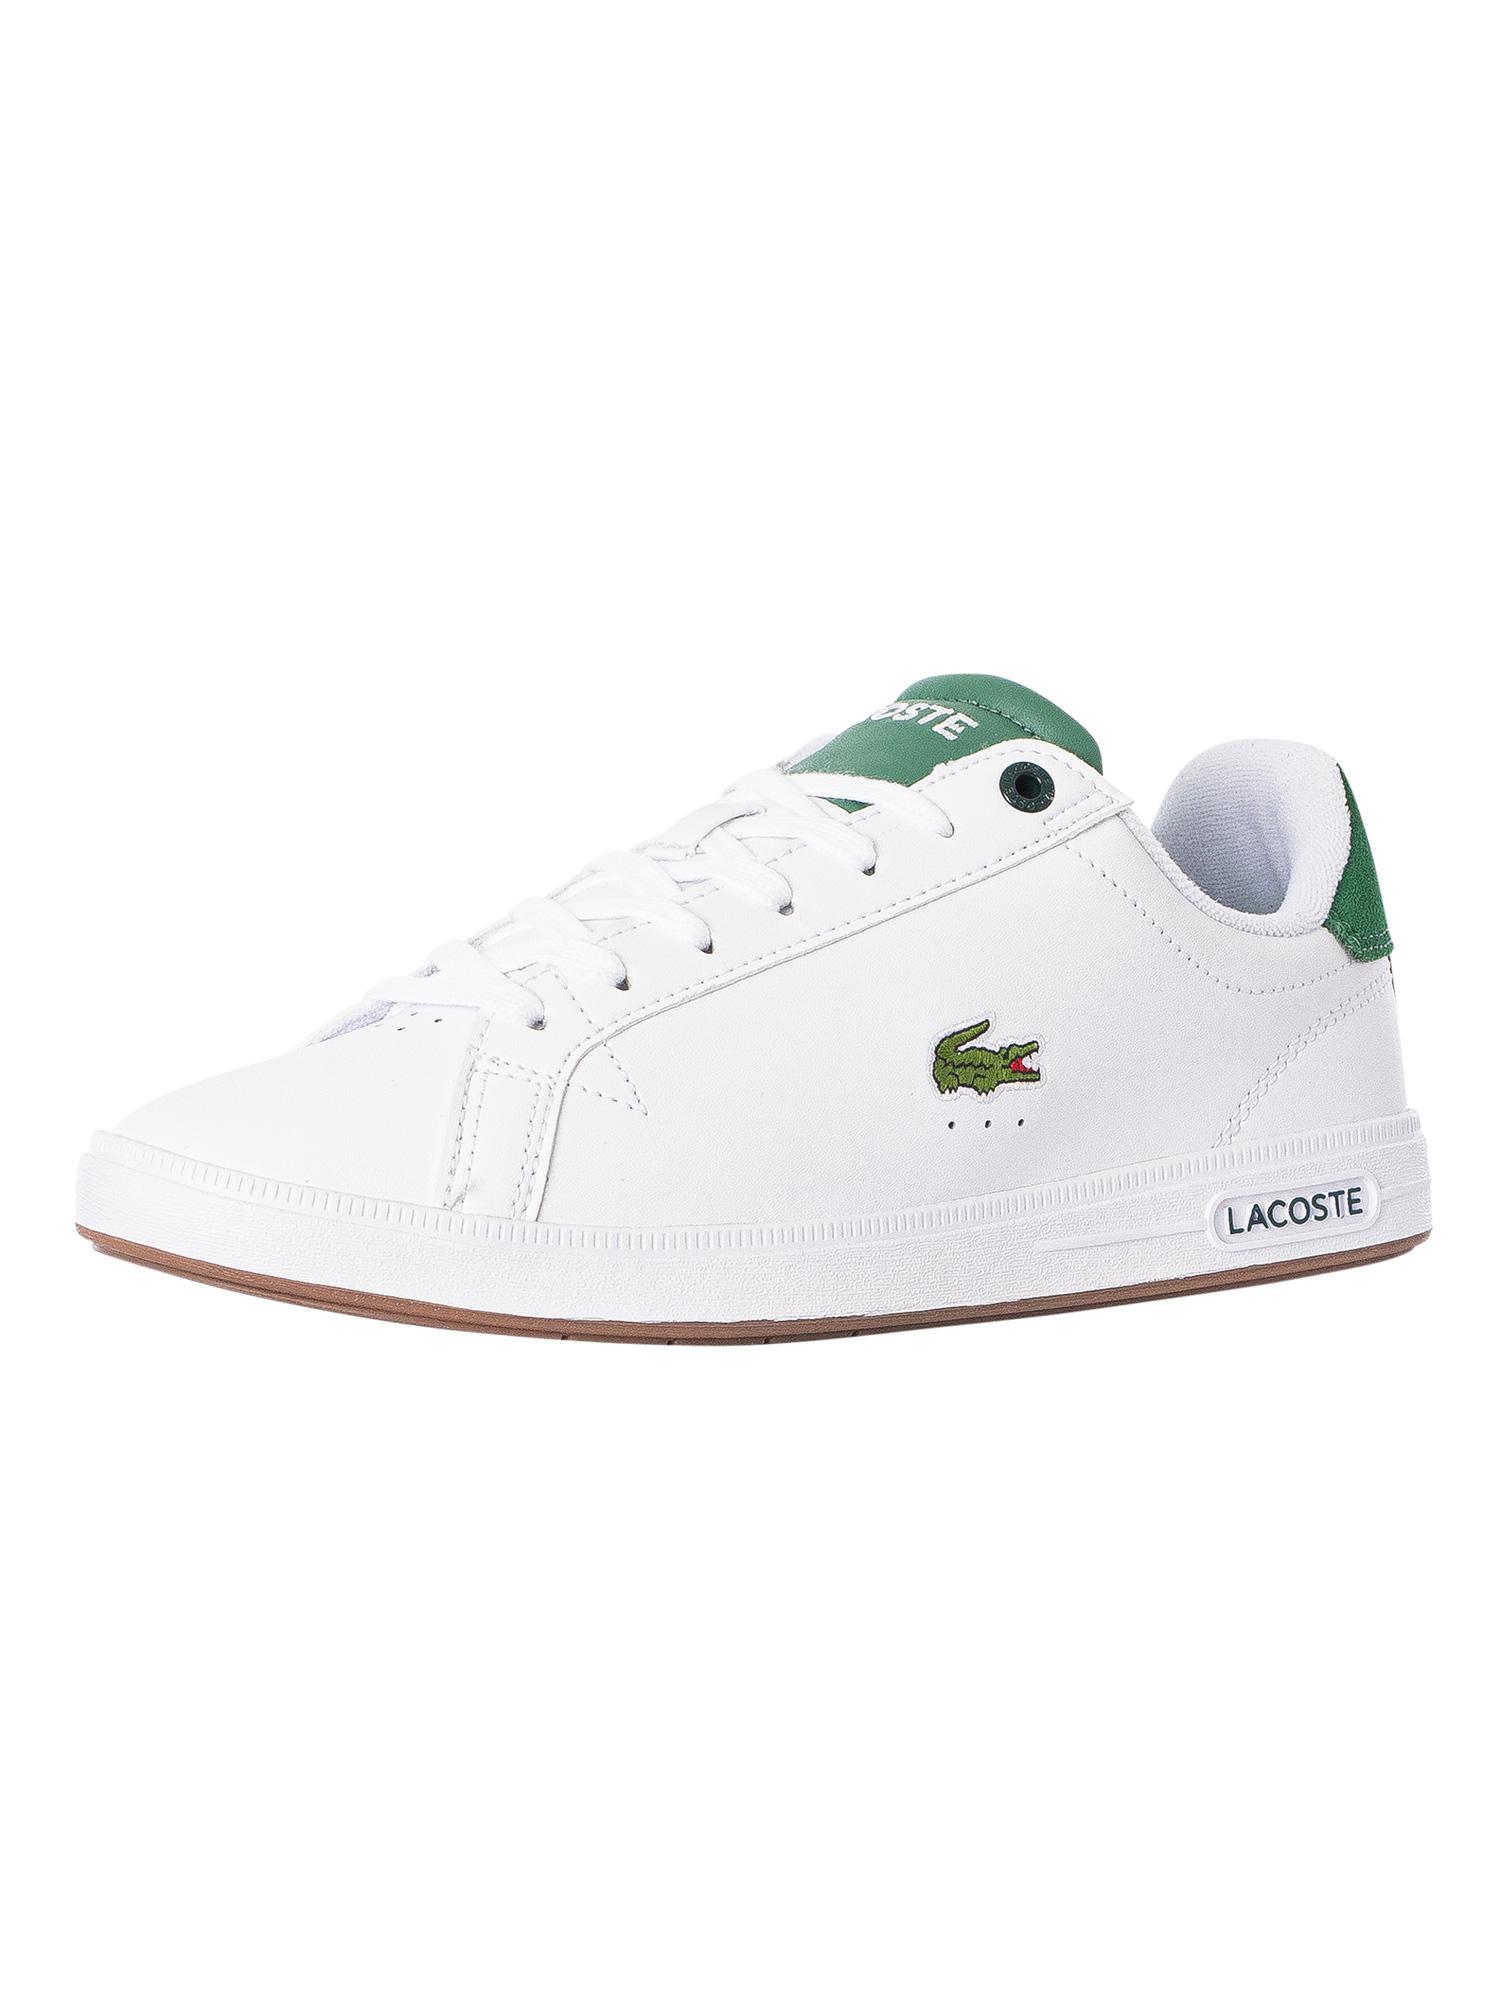 Phalanx Doornen Methode Lacoste Graduate Pro 123 2 Sma Leather Trainers in White for Men | Lyst